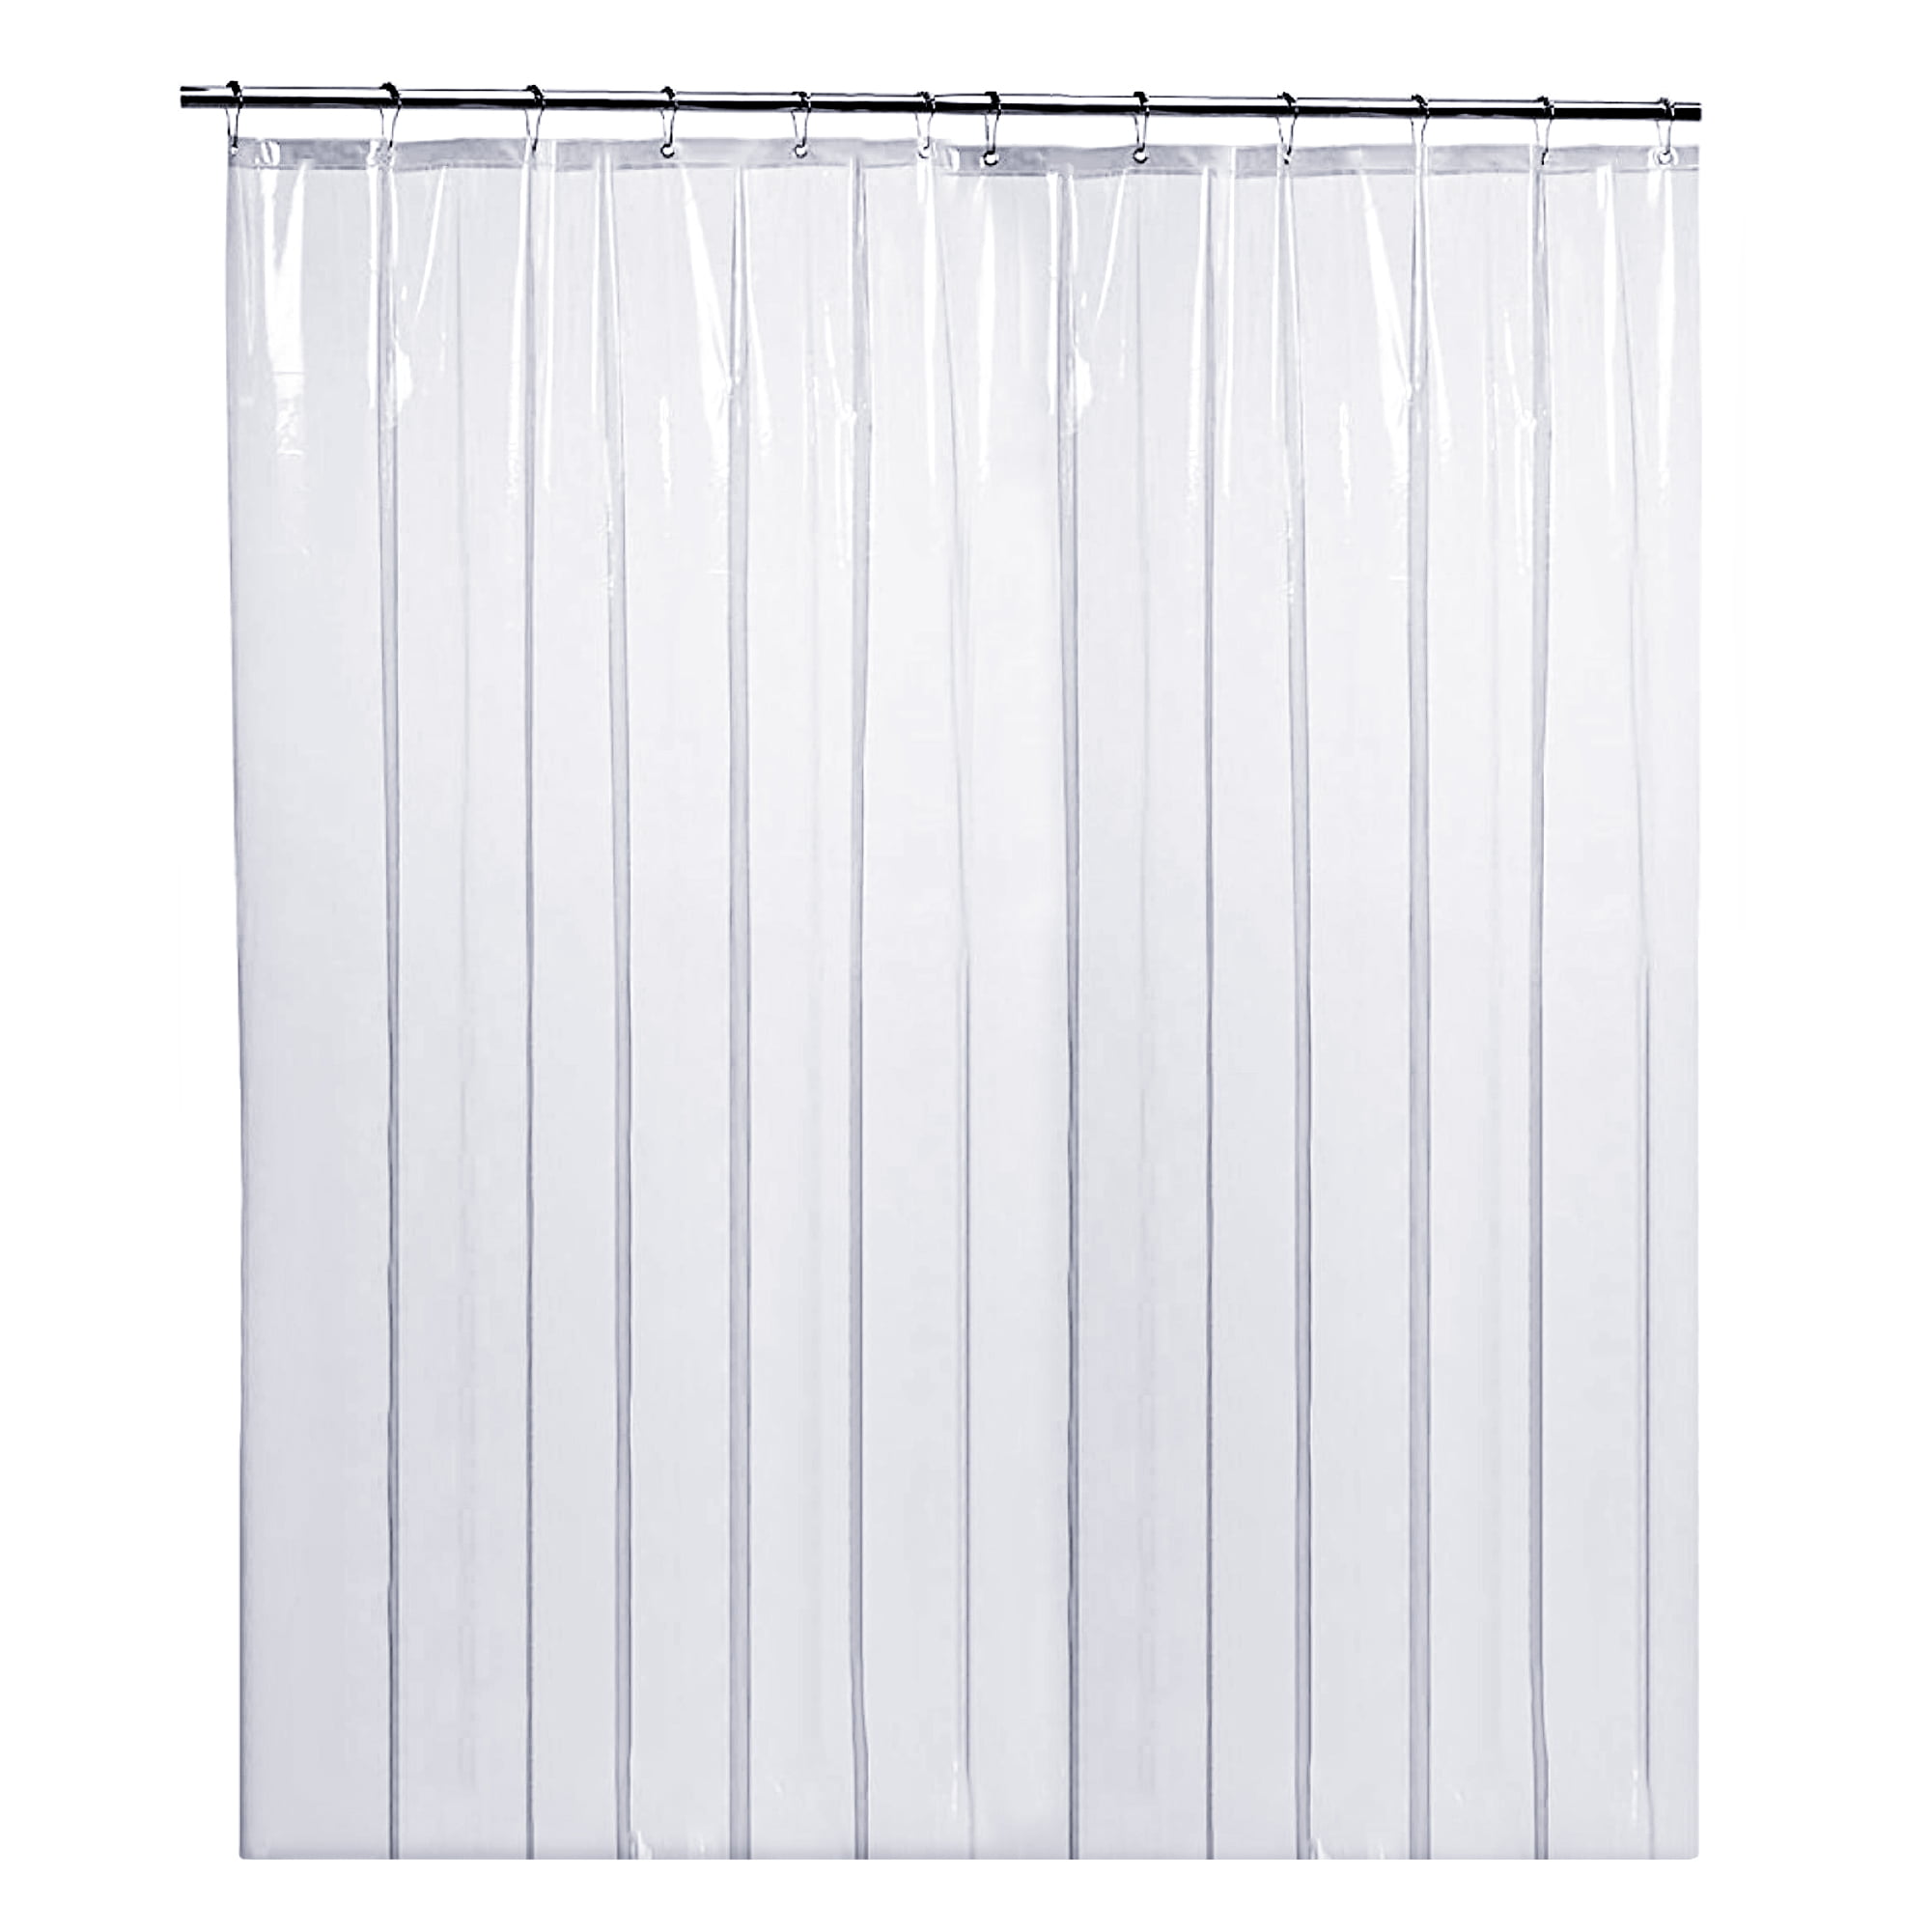 Waterproof Shower Stall Curtain Liner, What Size Shower Curtain For Stall